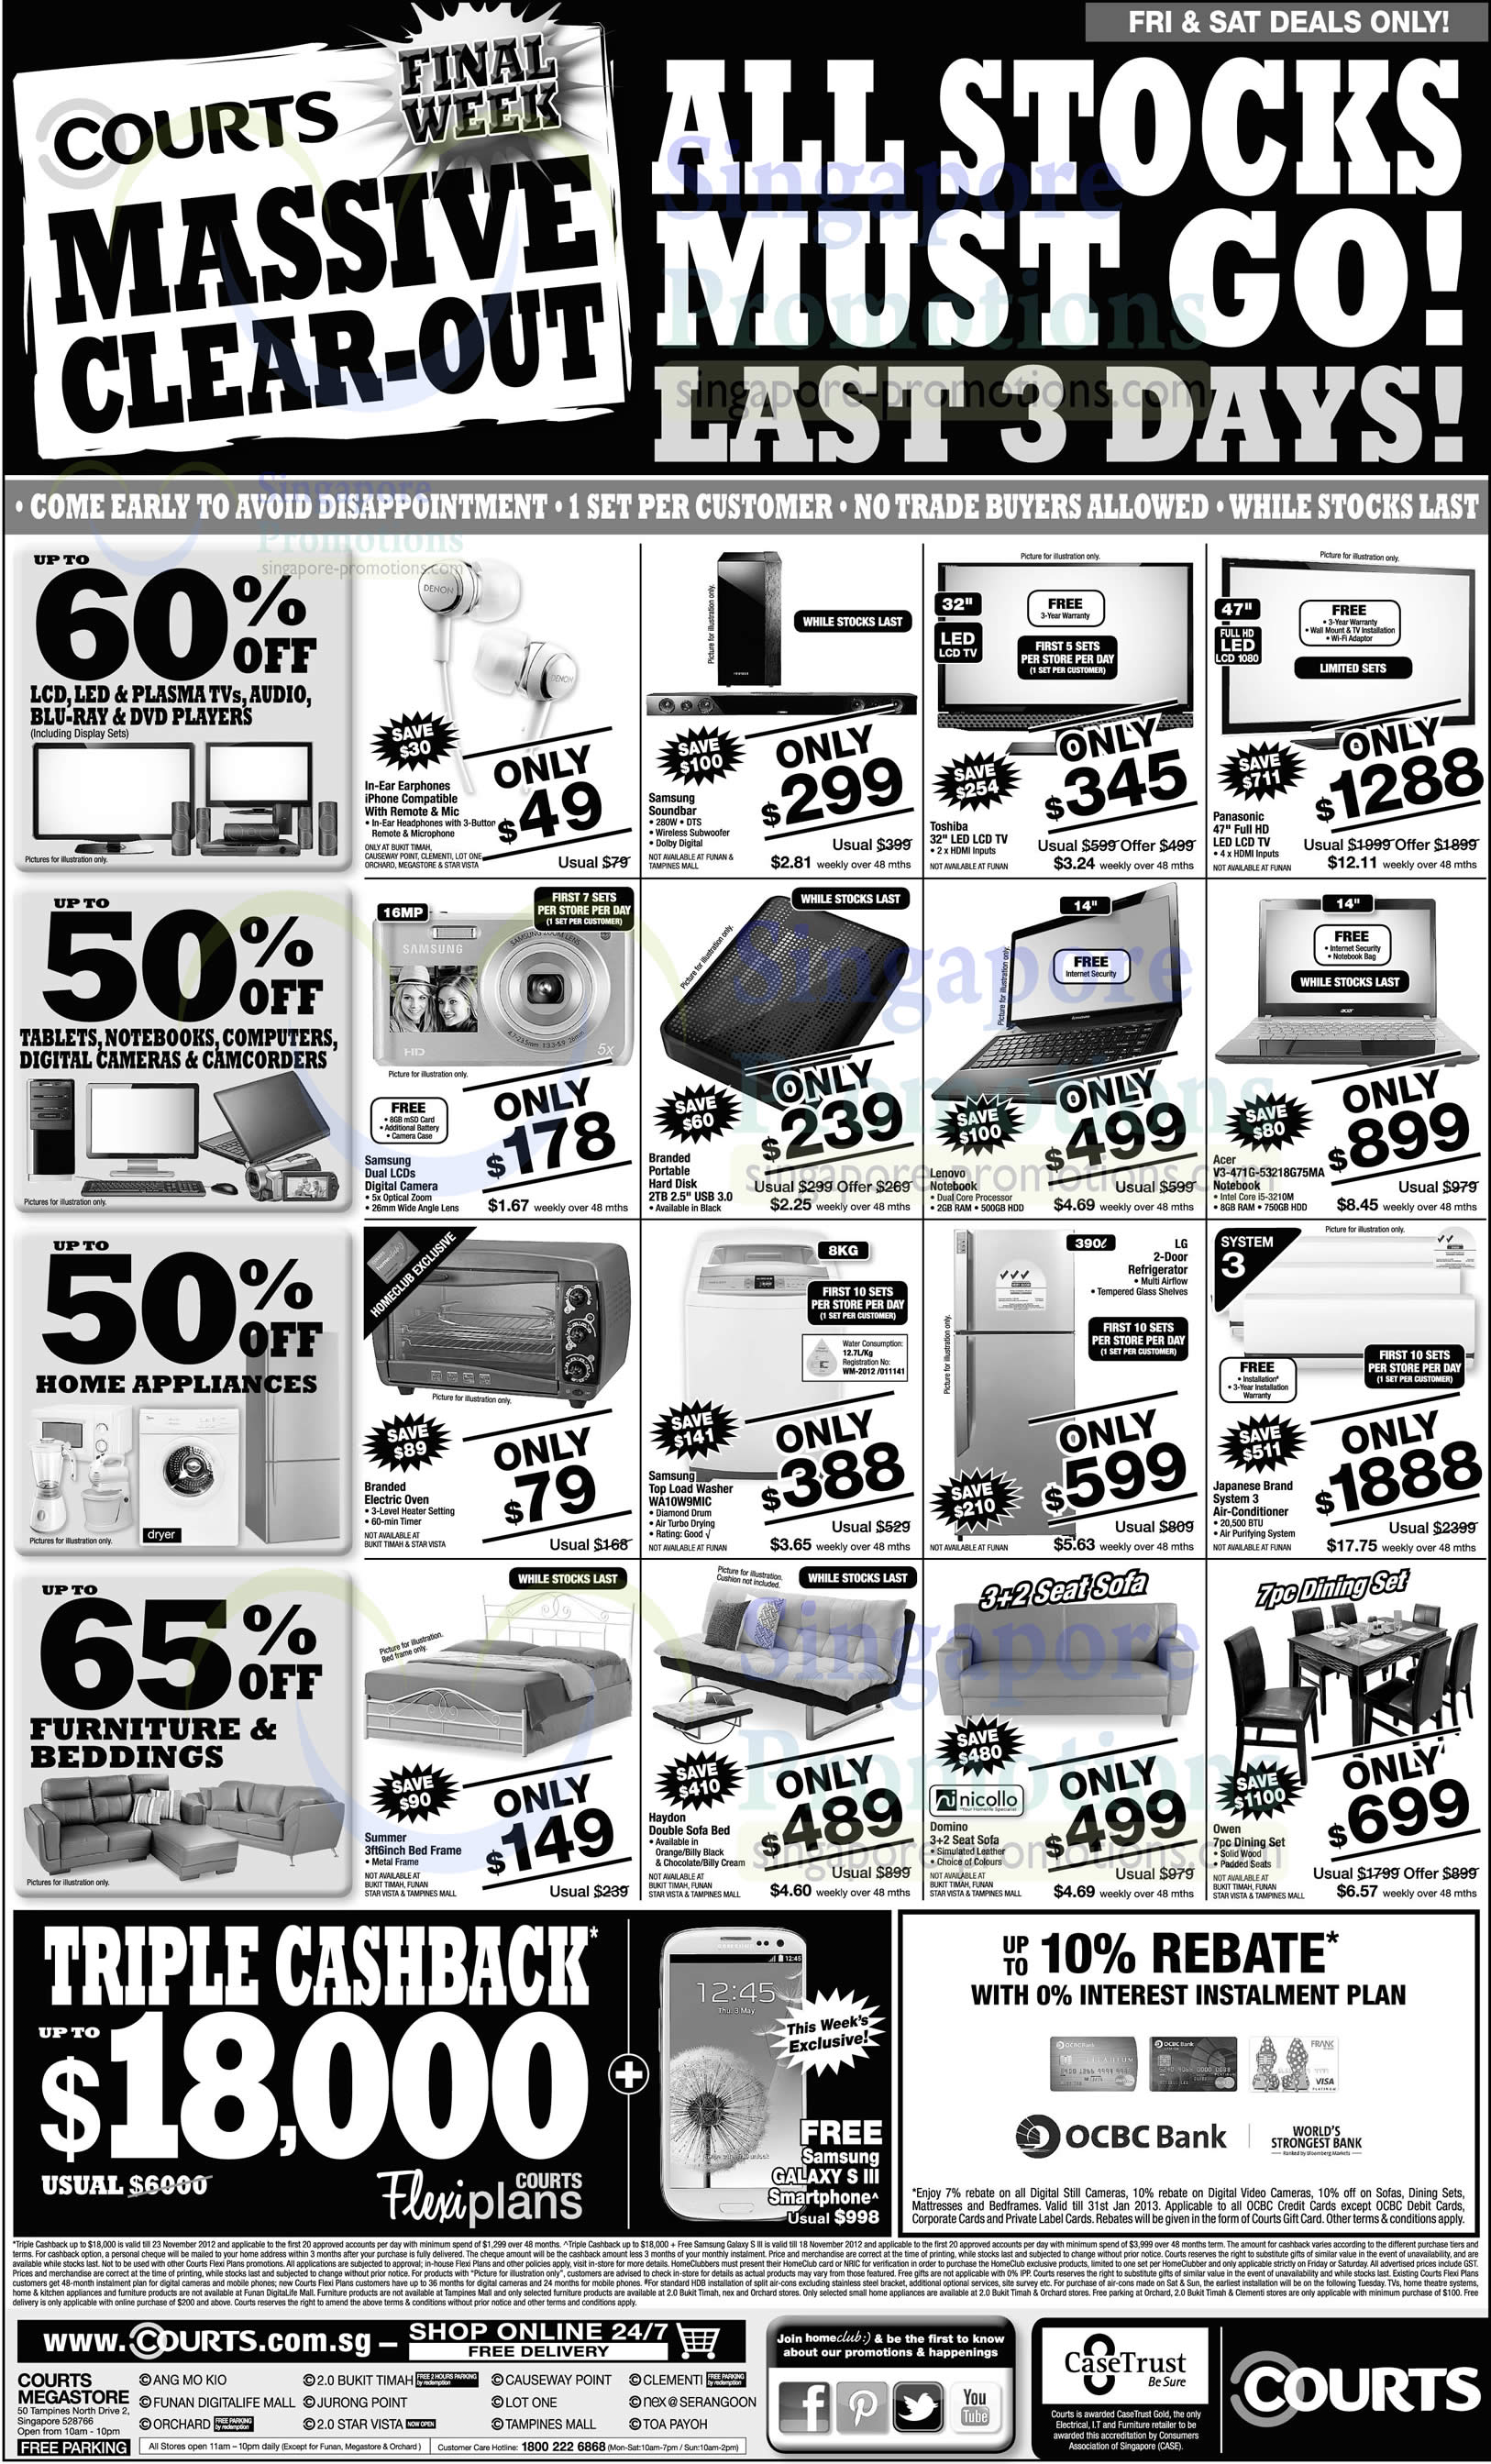 Featured image for Courts Massive Clear-Out Promotion Offers 16 - 19 Nov 2012